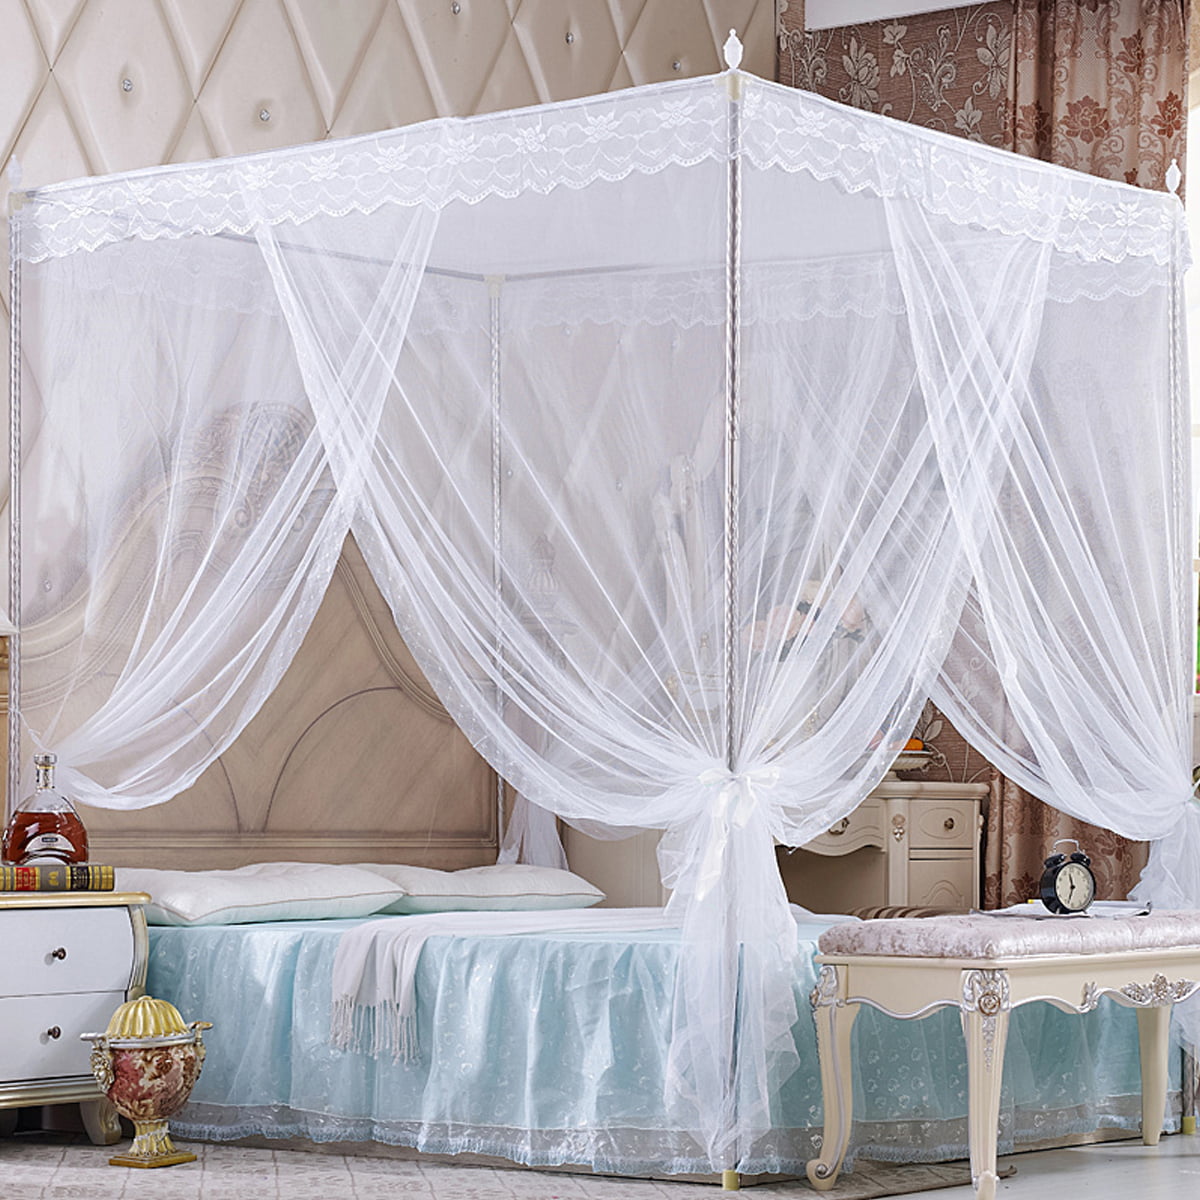 Details about   4 Corner Post Bed Curtain Canopy Bed Curtain Drapes for Adults Girls